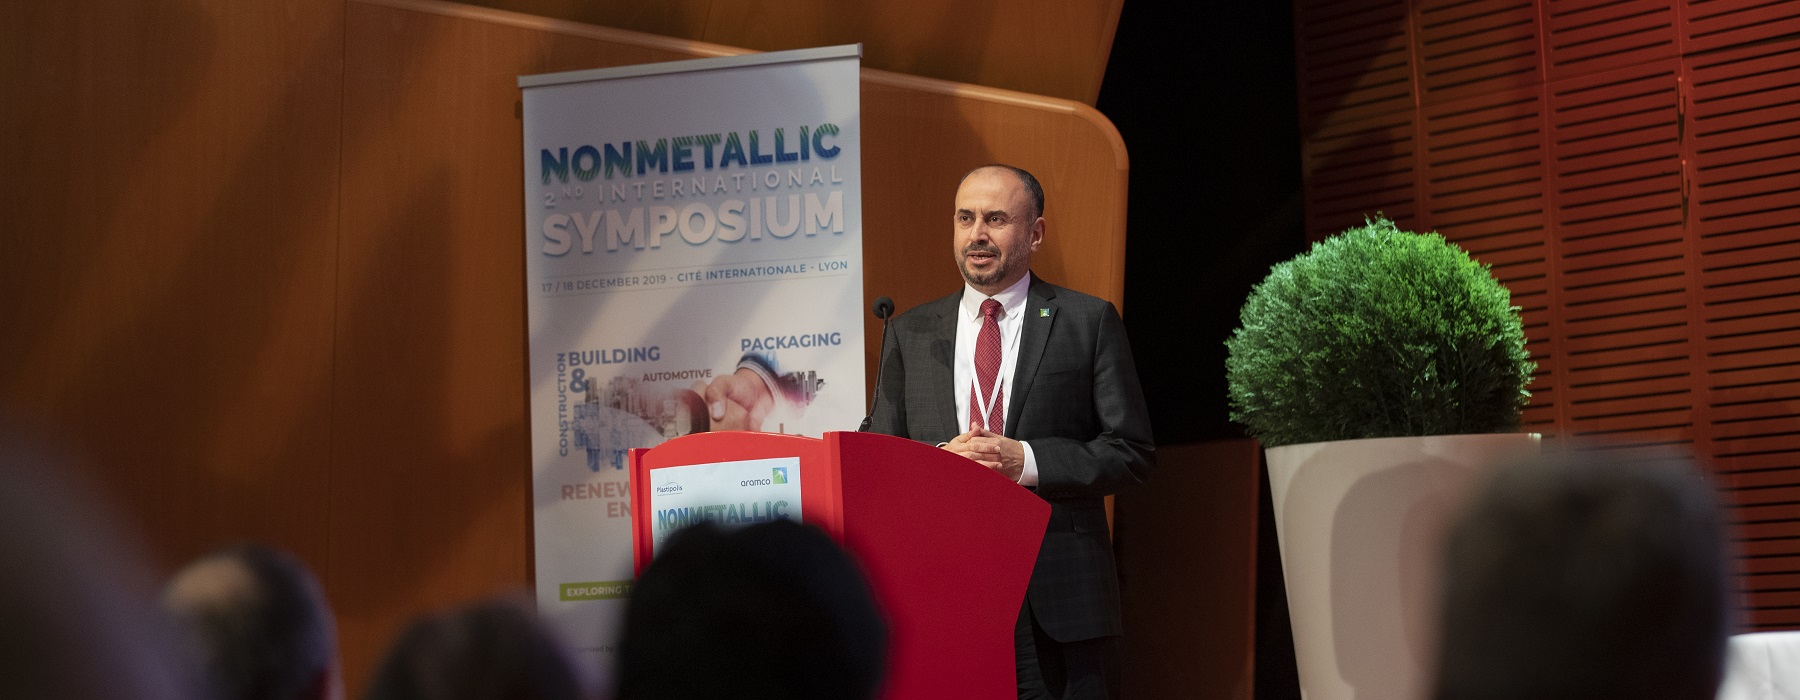 Ahmad A. Al Sa’adi, senior vice president of Technical Services with Saudi Aramco making the opening remarks at the second international nonmetallics symposium